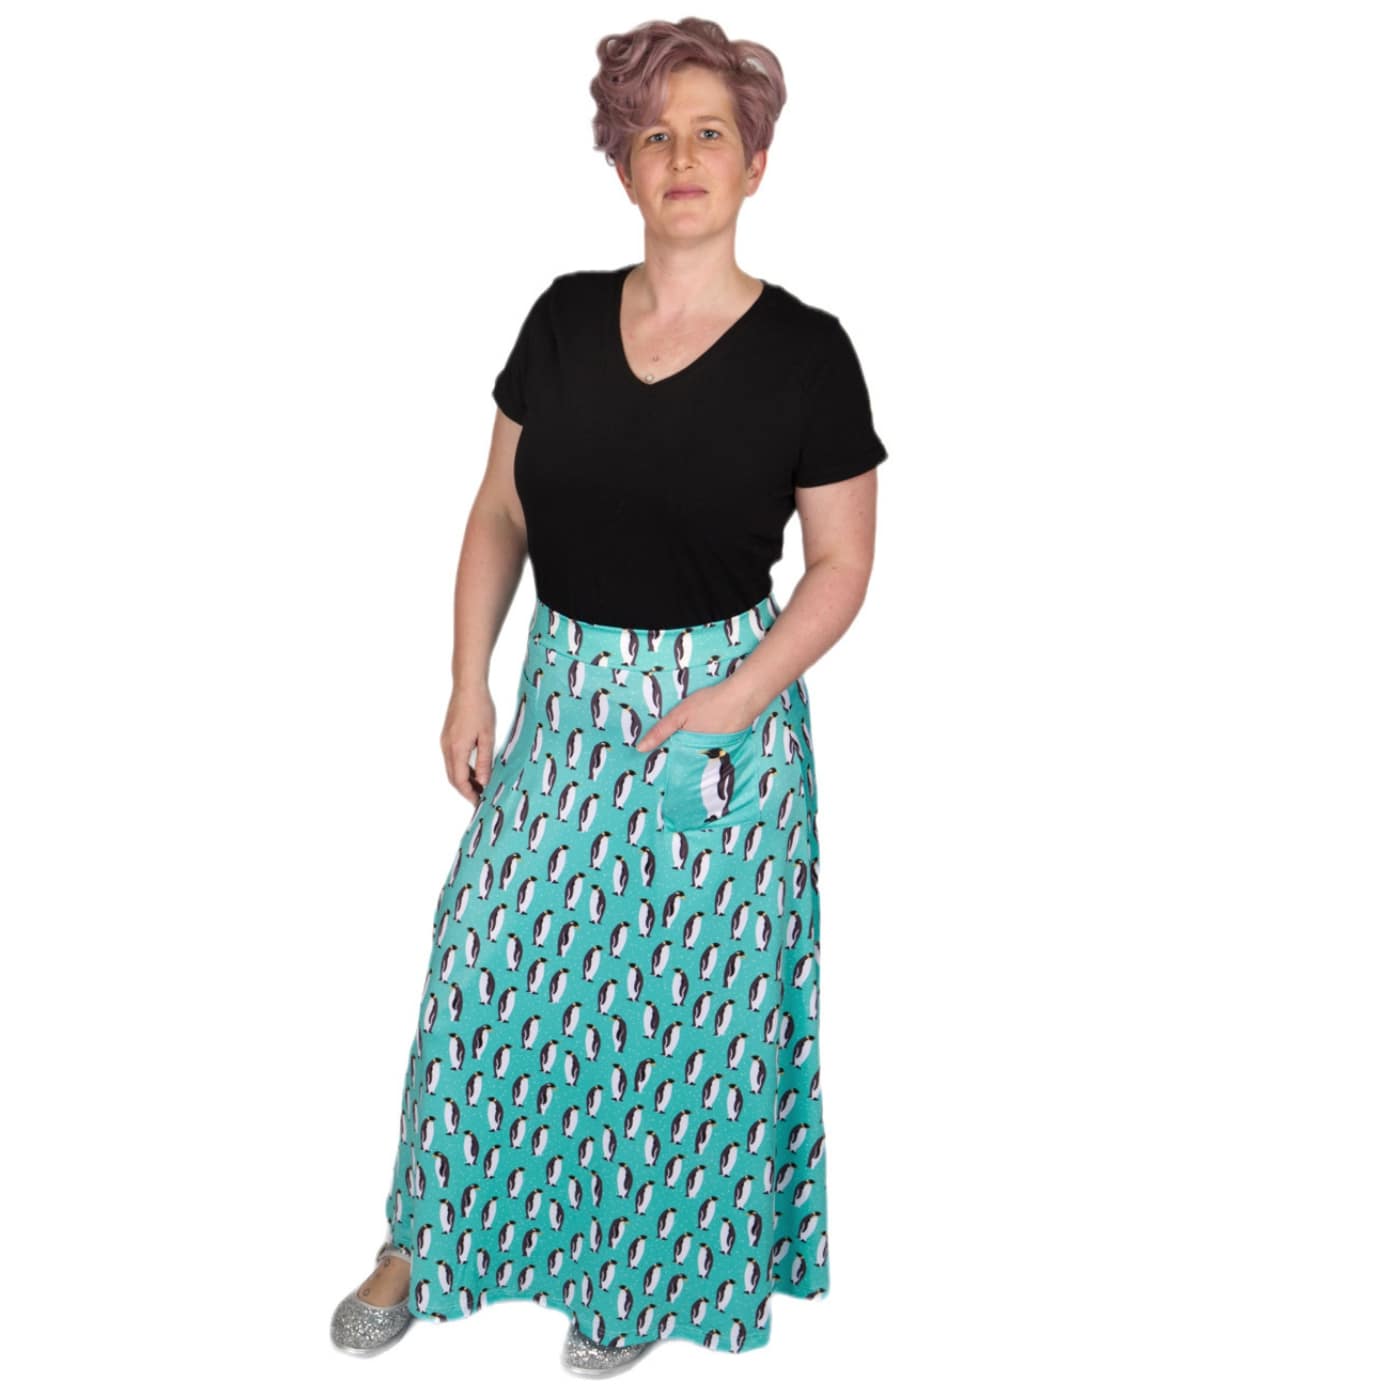 Waddle Maxi Skirt by RainbowsAndFairies.com.au (Emperor Penguin - Penguins - Animal Print - Long Skirt - Vintage Inspired - Boho - Skirt With Pockets) - SKU: CL_MAXIS_WADDL_ORG - Pic-07